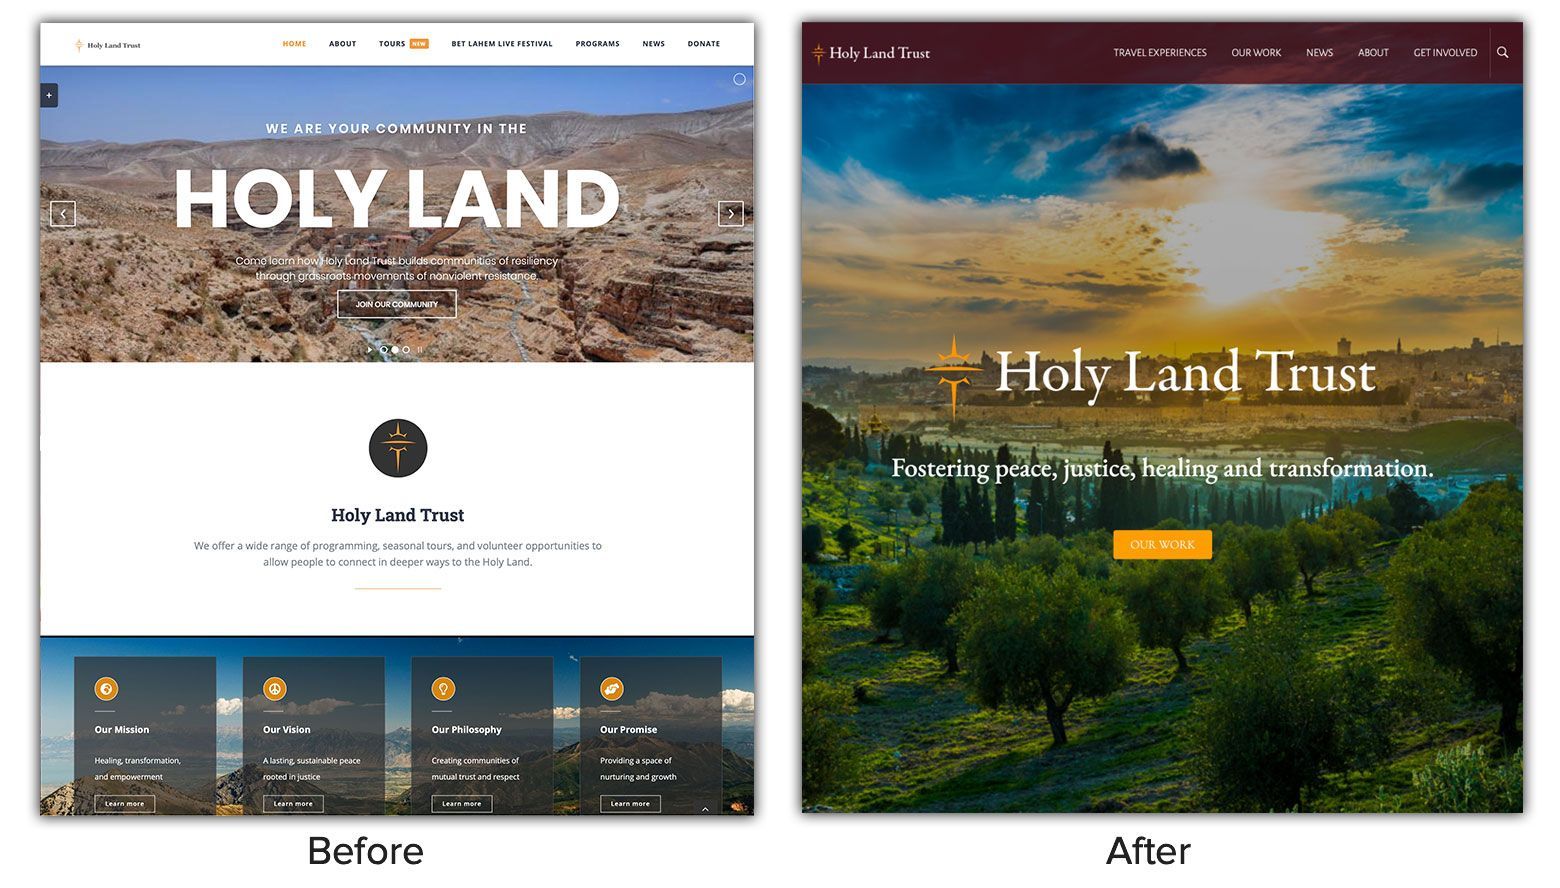 a before and after image of the holy land trust website